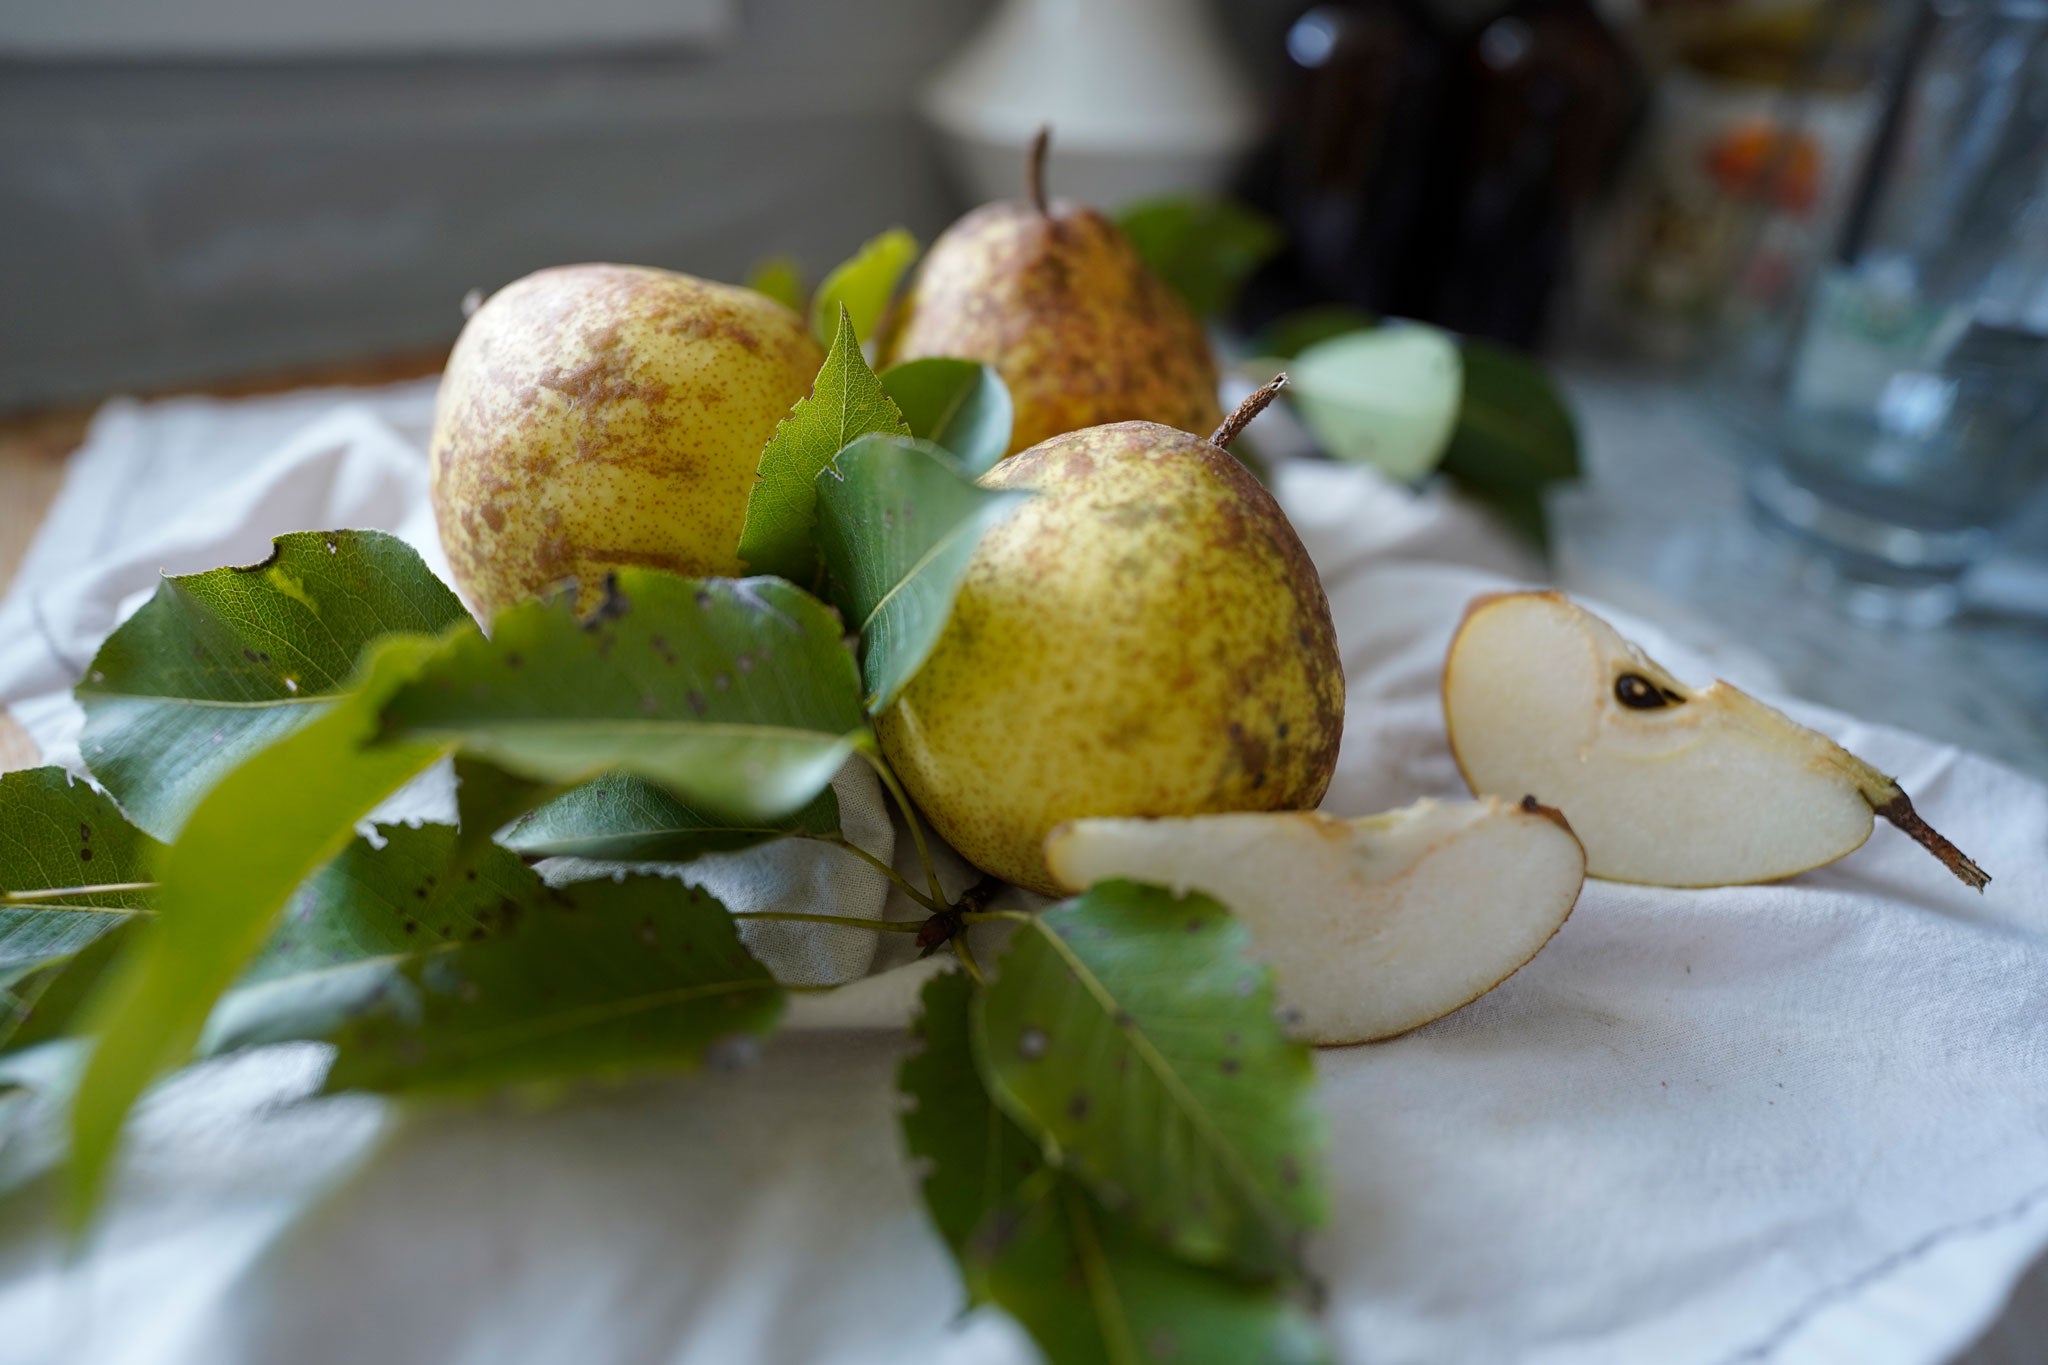 Pears, pear leaves, and pear slices on white dish towel and wood cutting board on kitchen counter